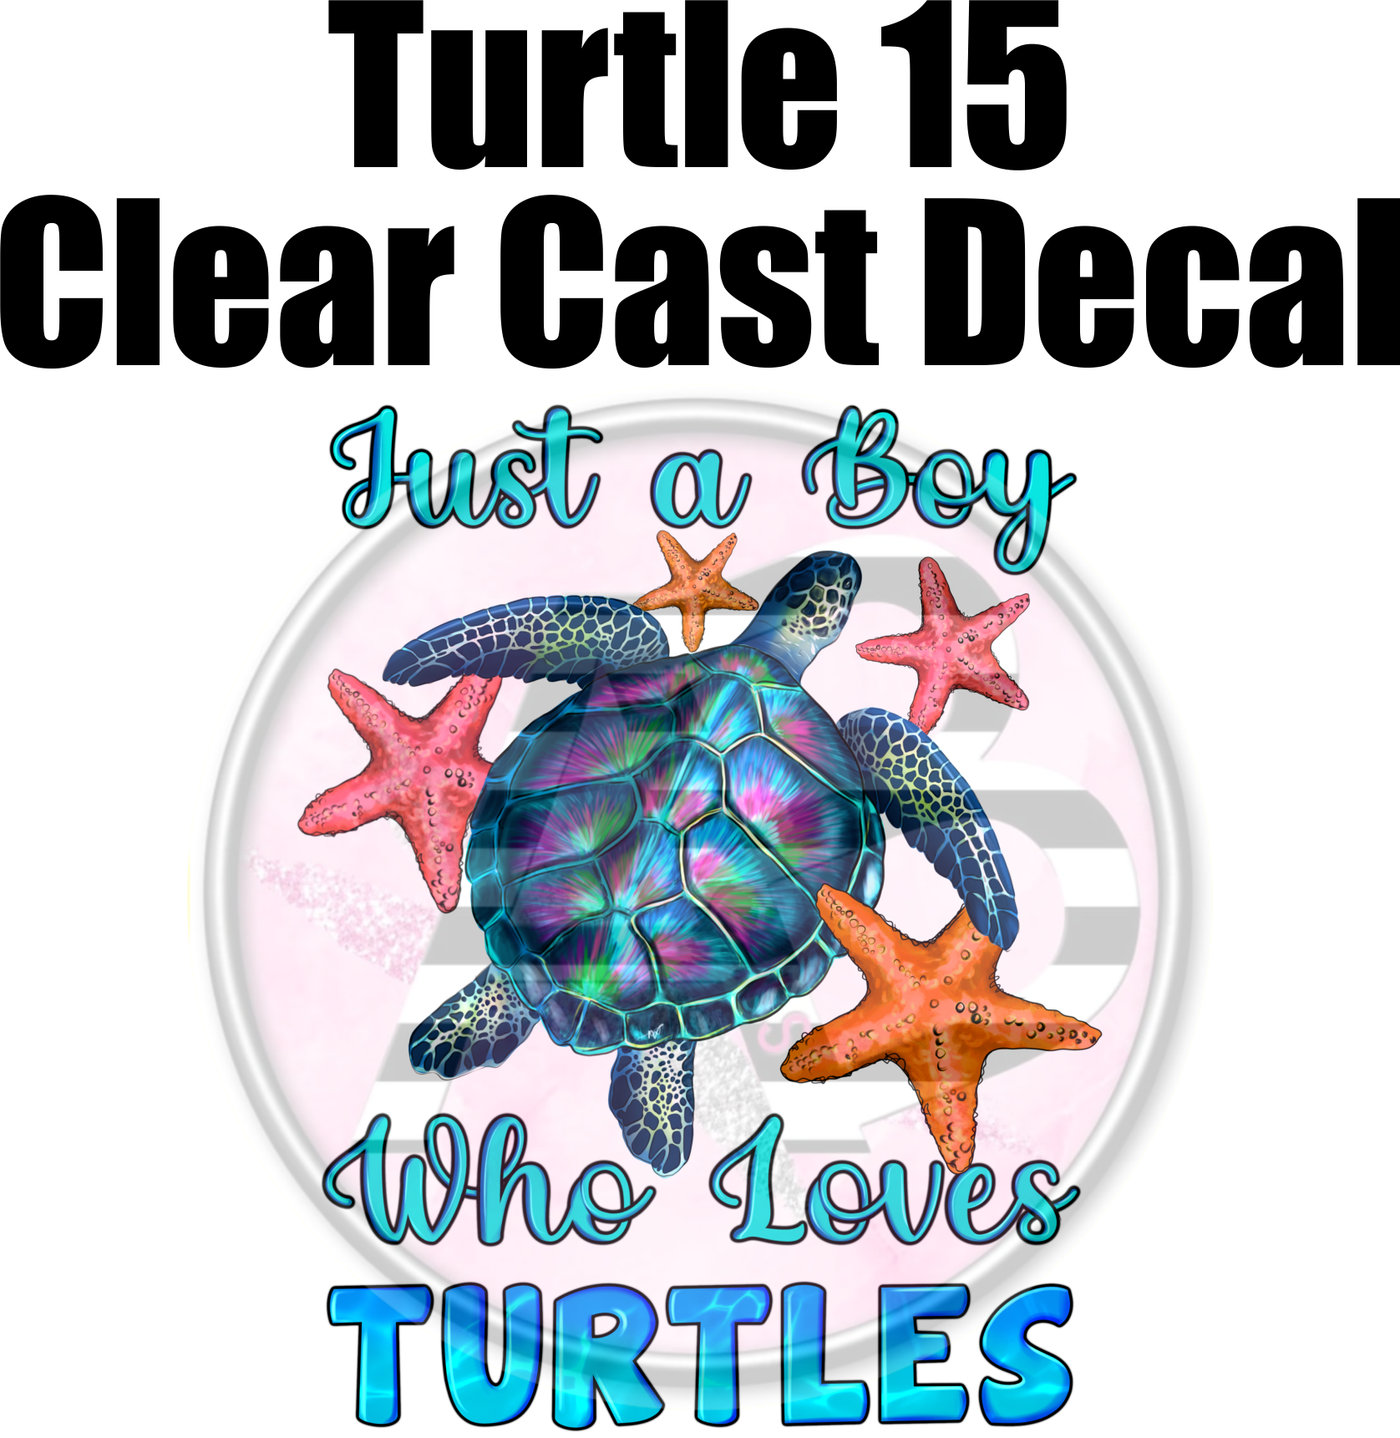 Turtle 15 - Clear Cast Decal